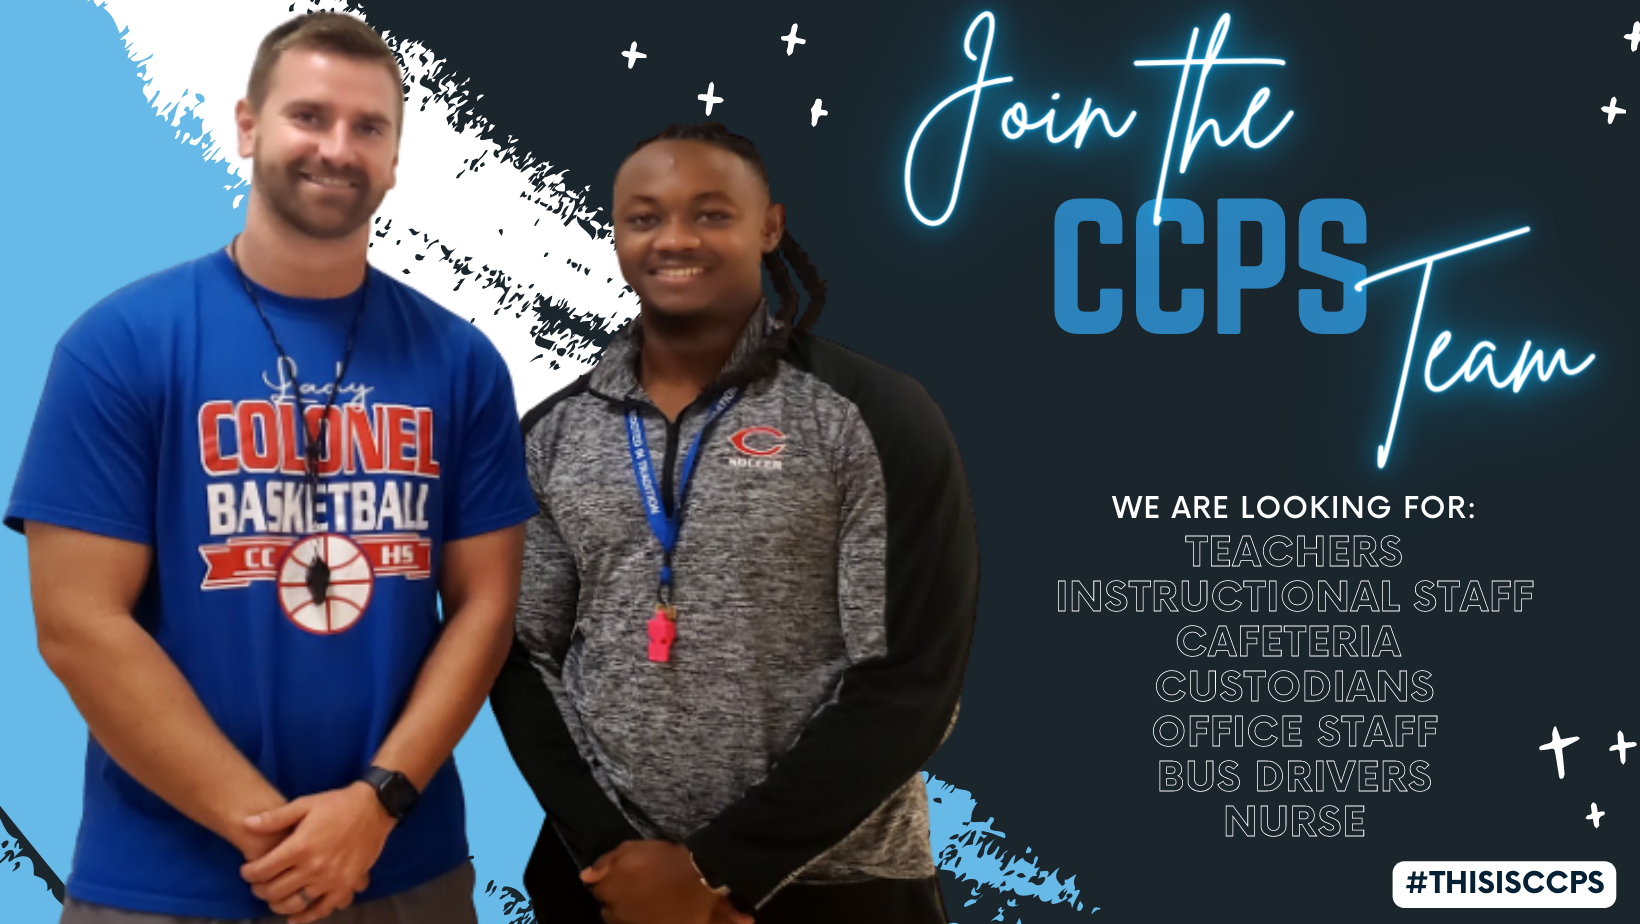 Join the CCPS Team